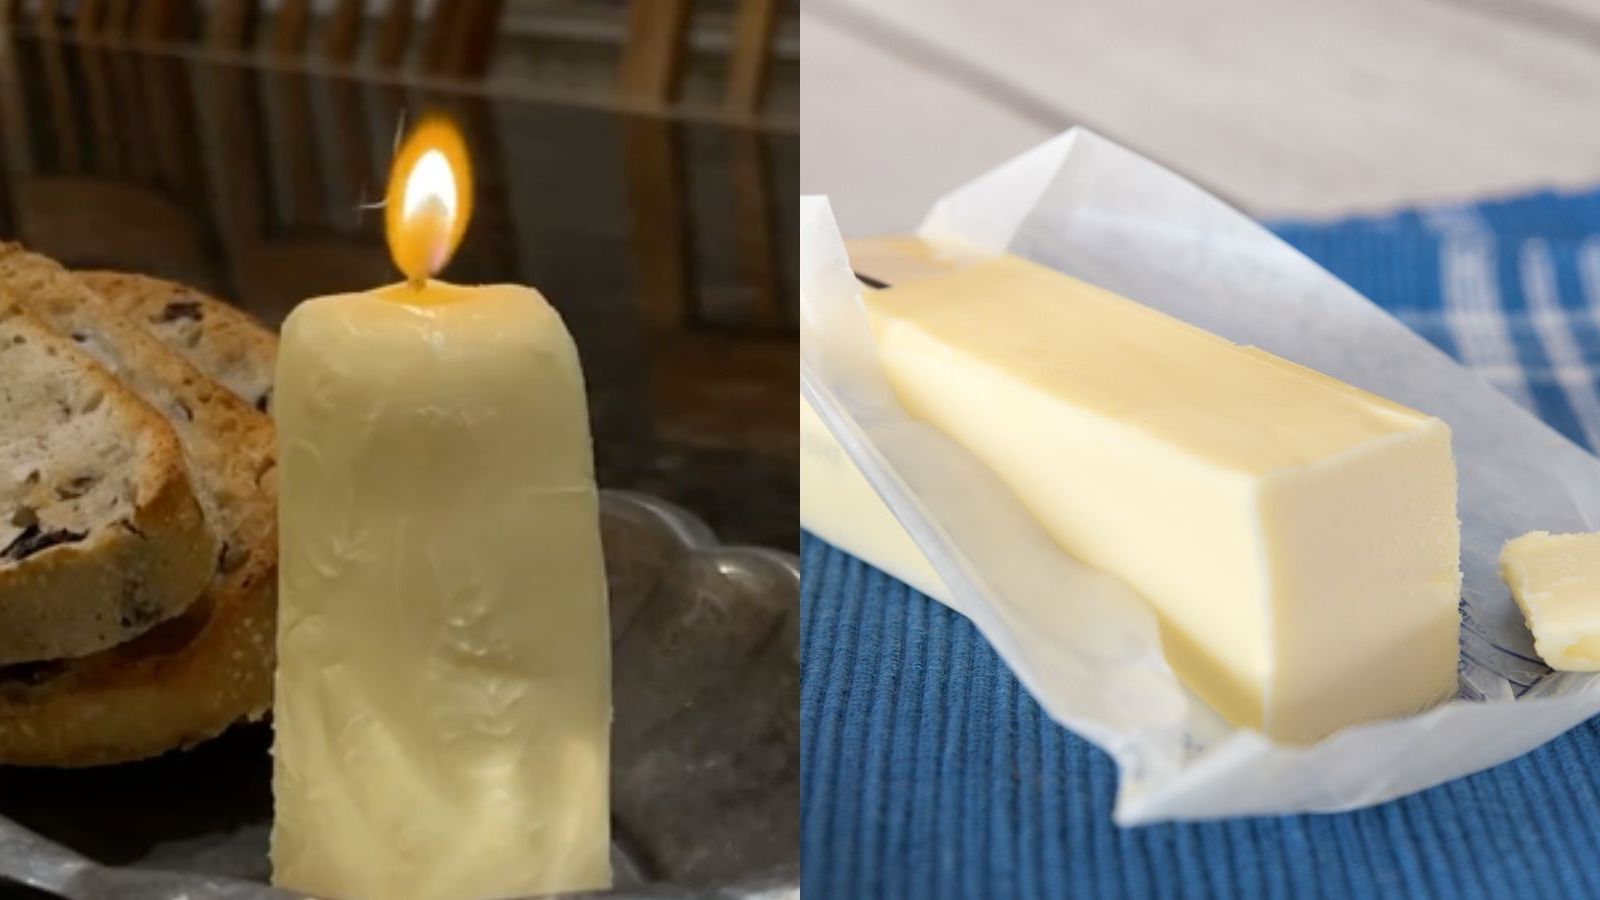 Are butter candles safe? How to do the TikTok trend the right way